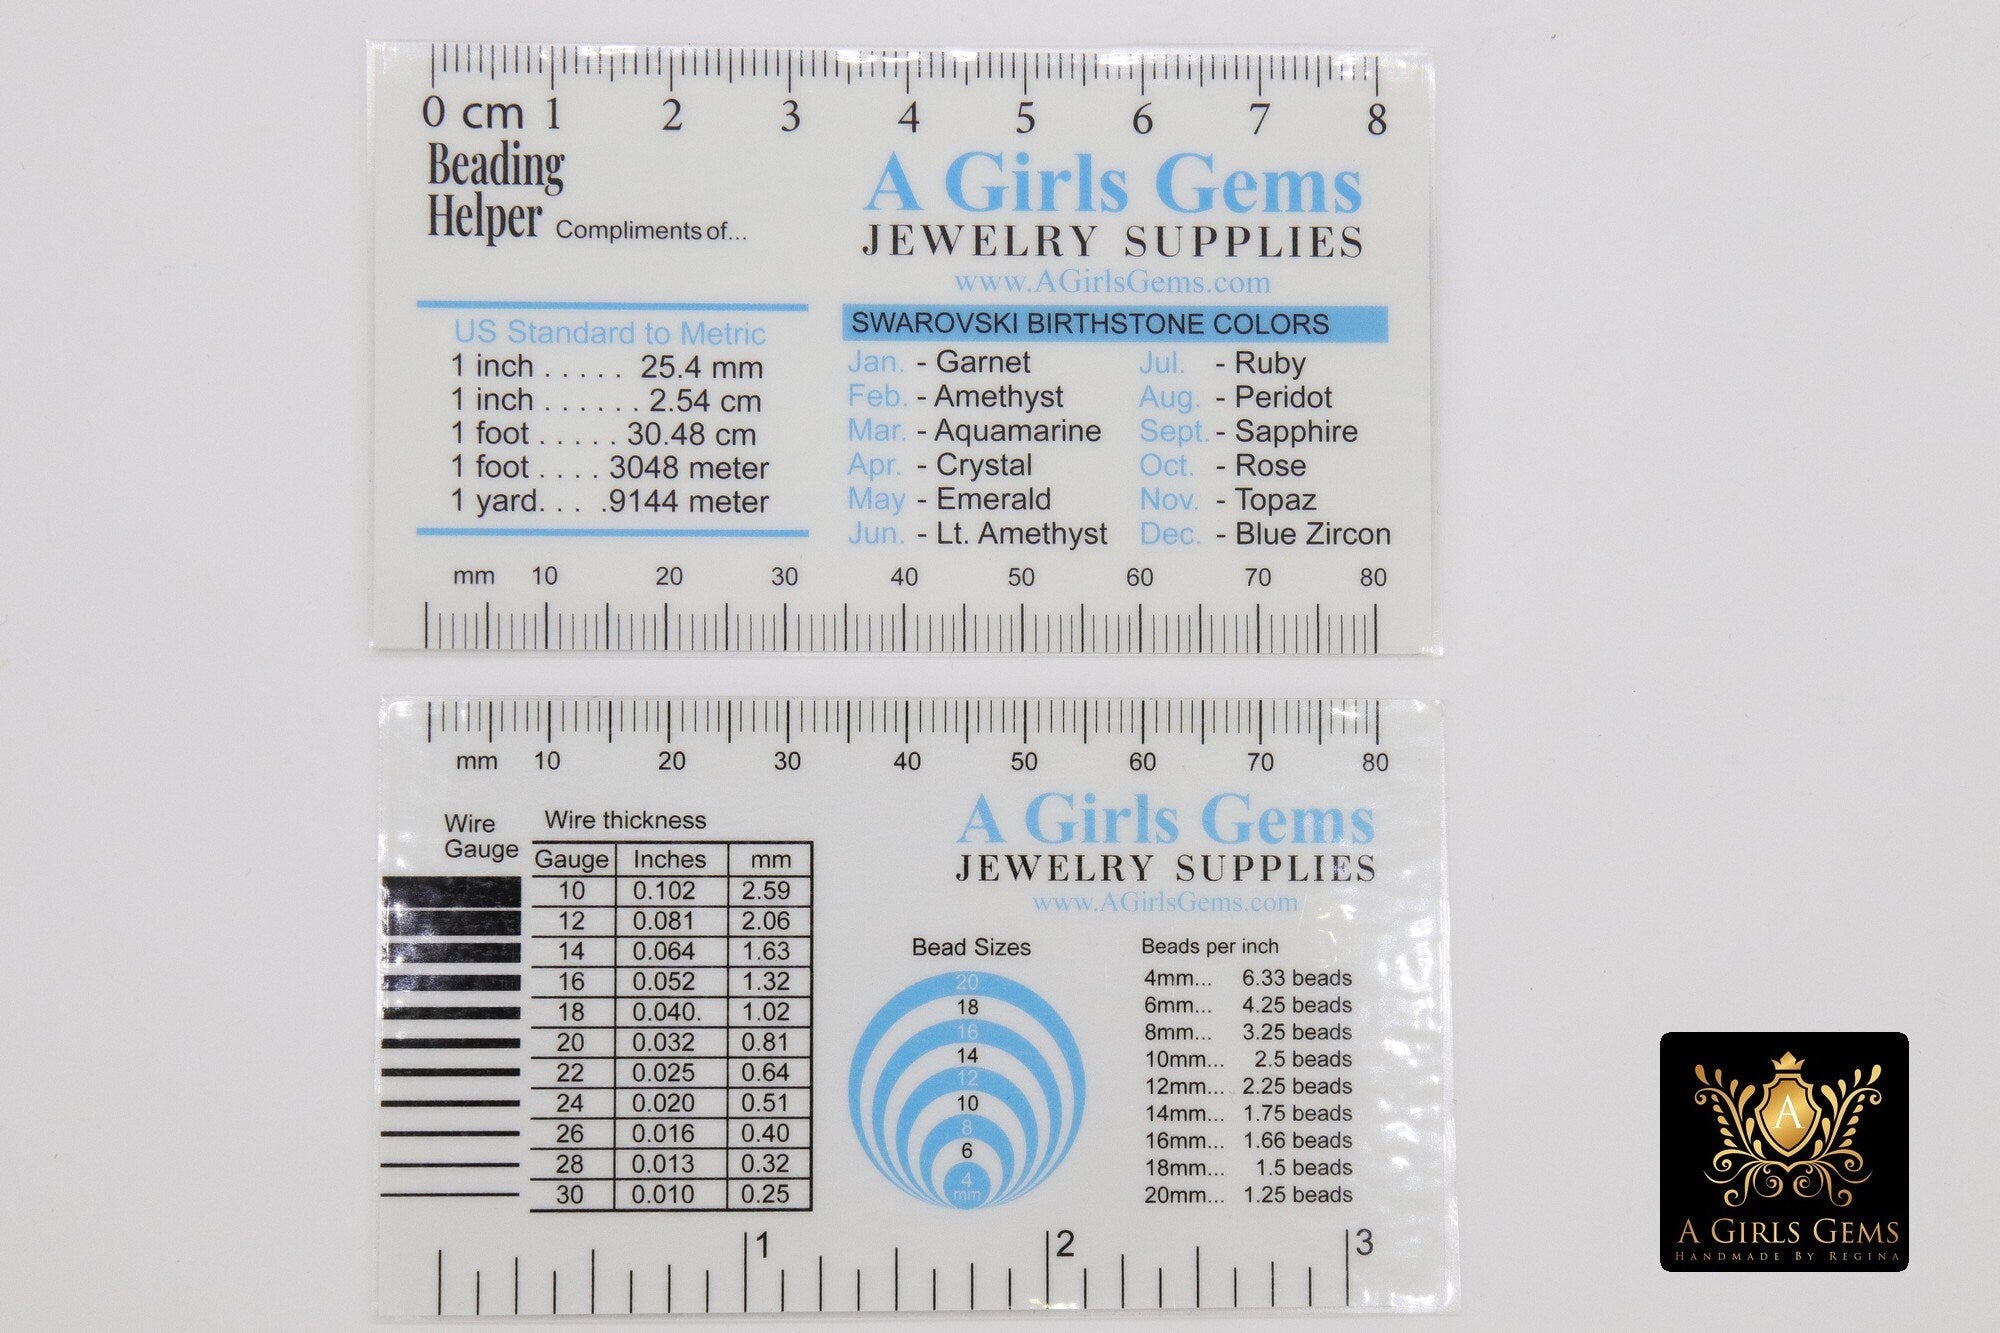 Bead Helper Laminated Cards, Bead or Wire Gauge Sizes, Ruler Reference In Centimeters, Millimeters or Inches, Pocket Jewelry Maker Tool